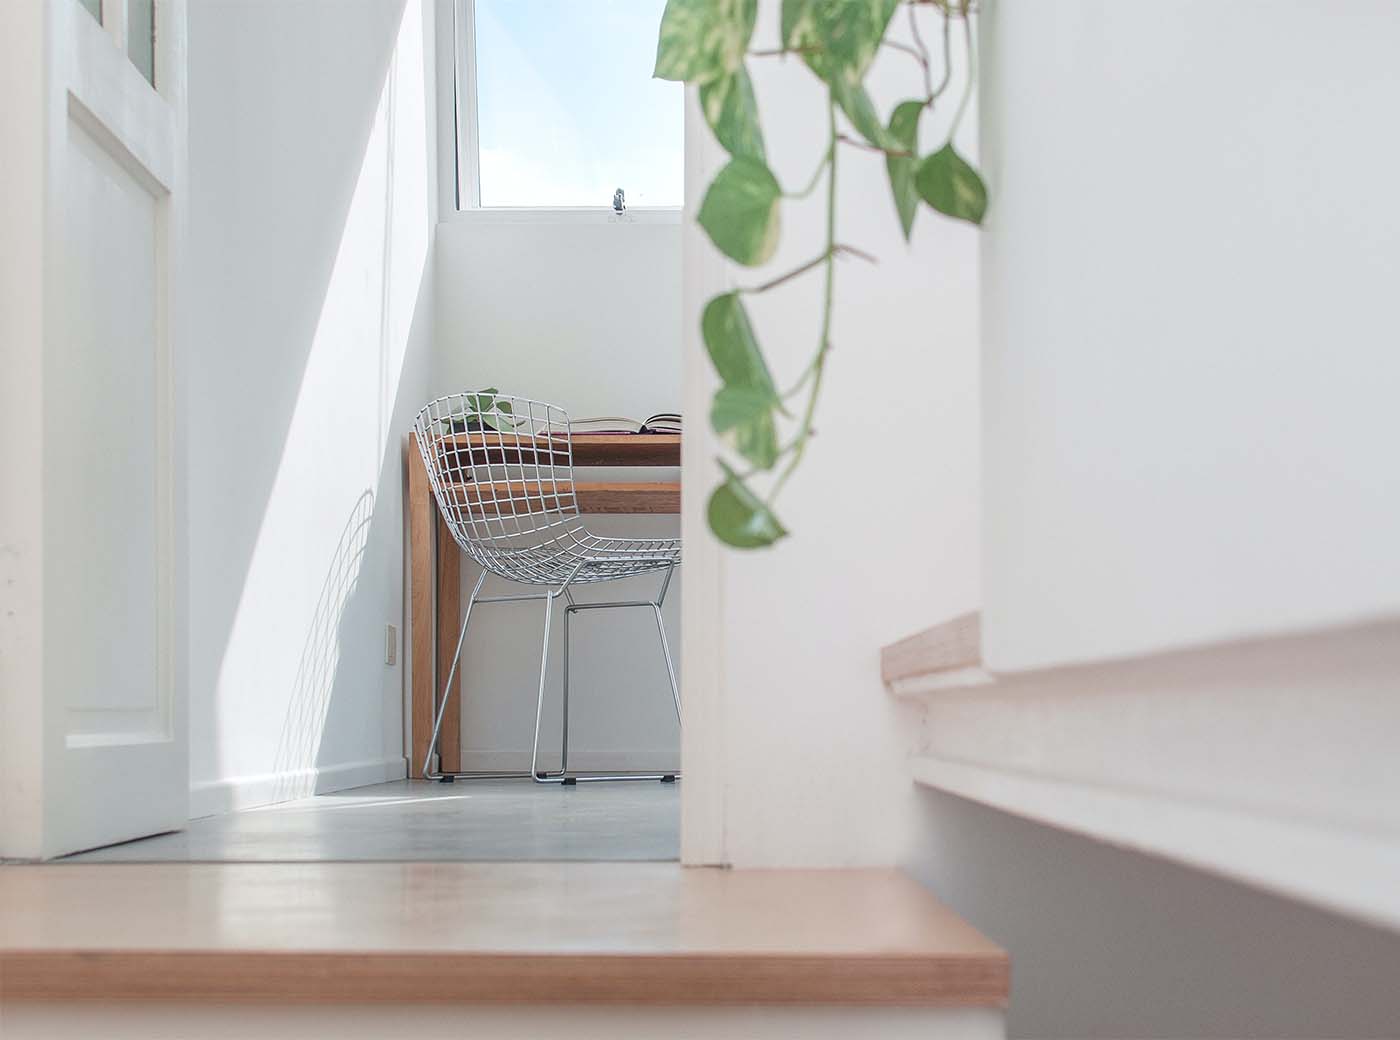 What Are The Benefits Of An Air Purifier?